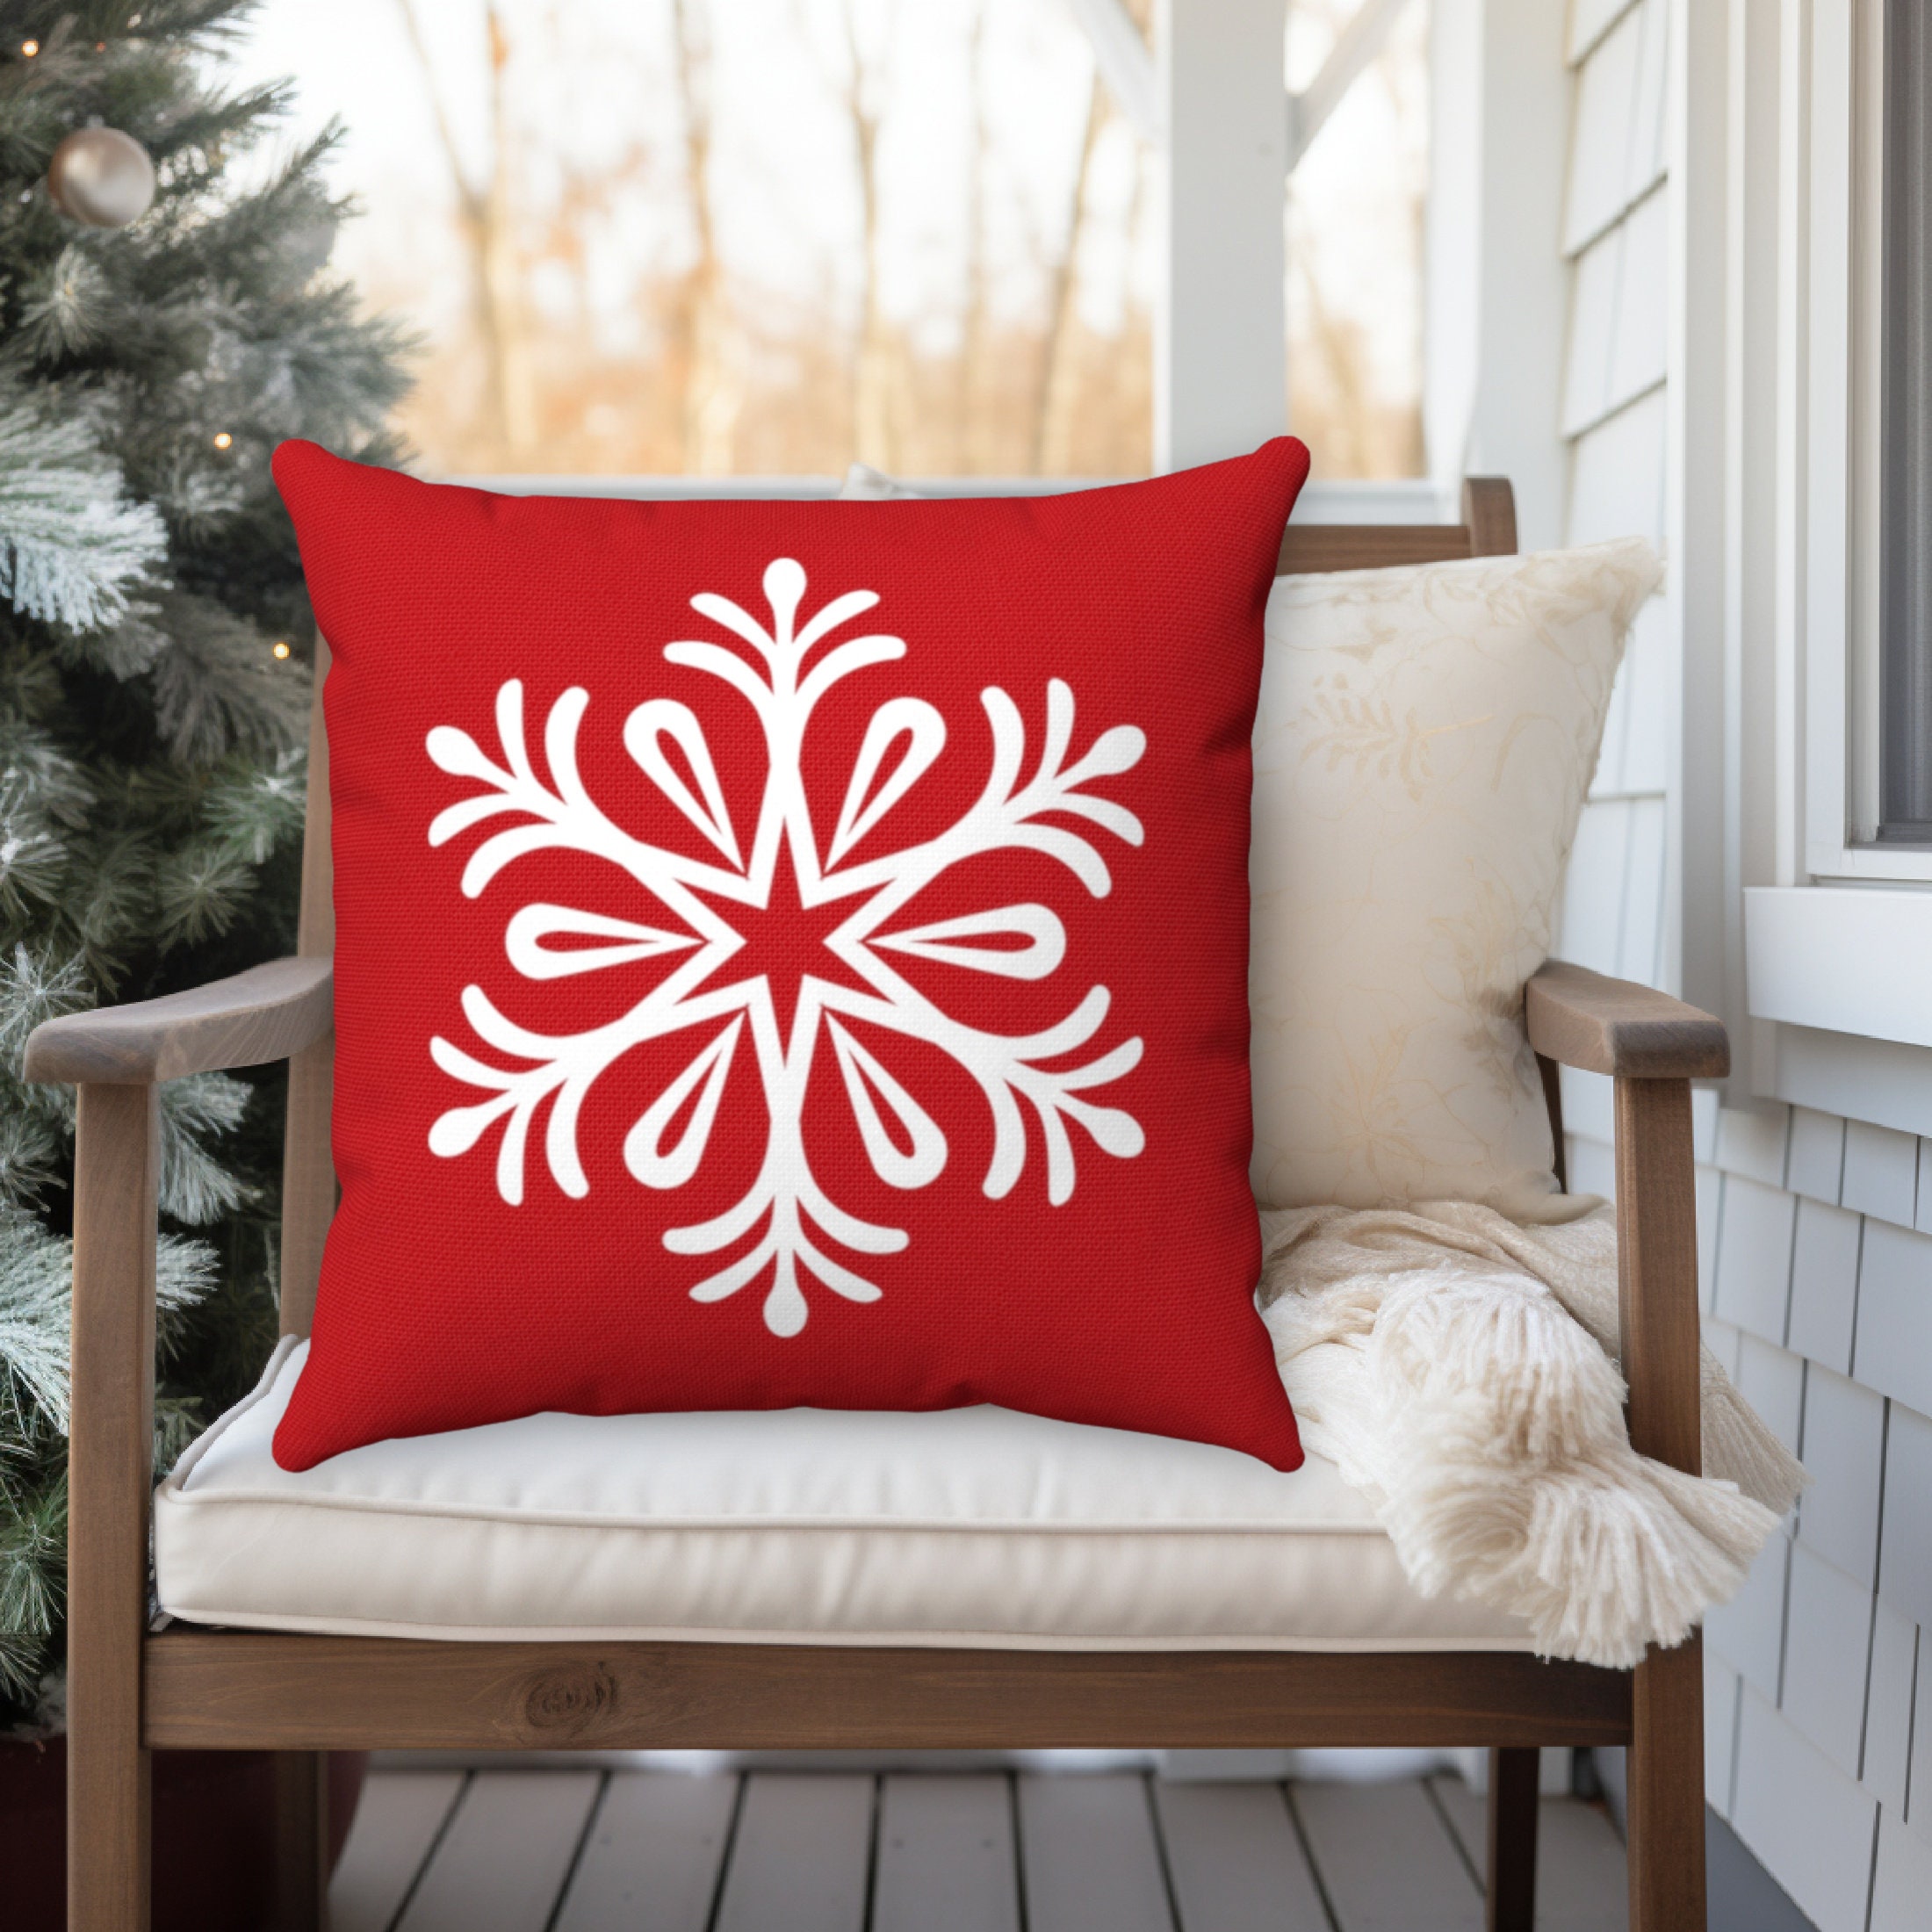 Ouddy 4Pcs Outdoor Christmas Pillows, Red Christmas Throw Pillows,  Snowflakes Merry Christmas Let it Snow Deer Christmas Pillow Cases Holiday  Pillow